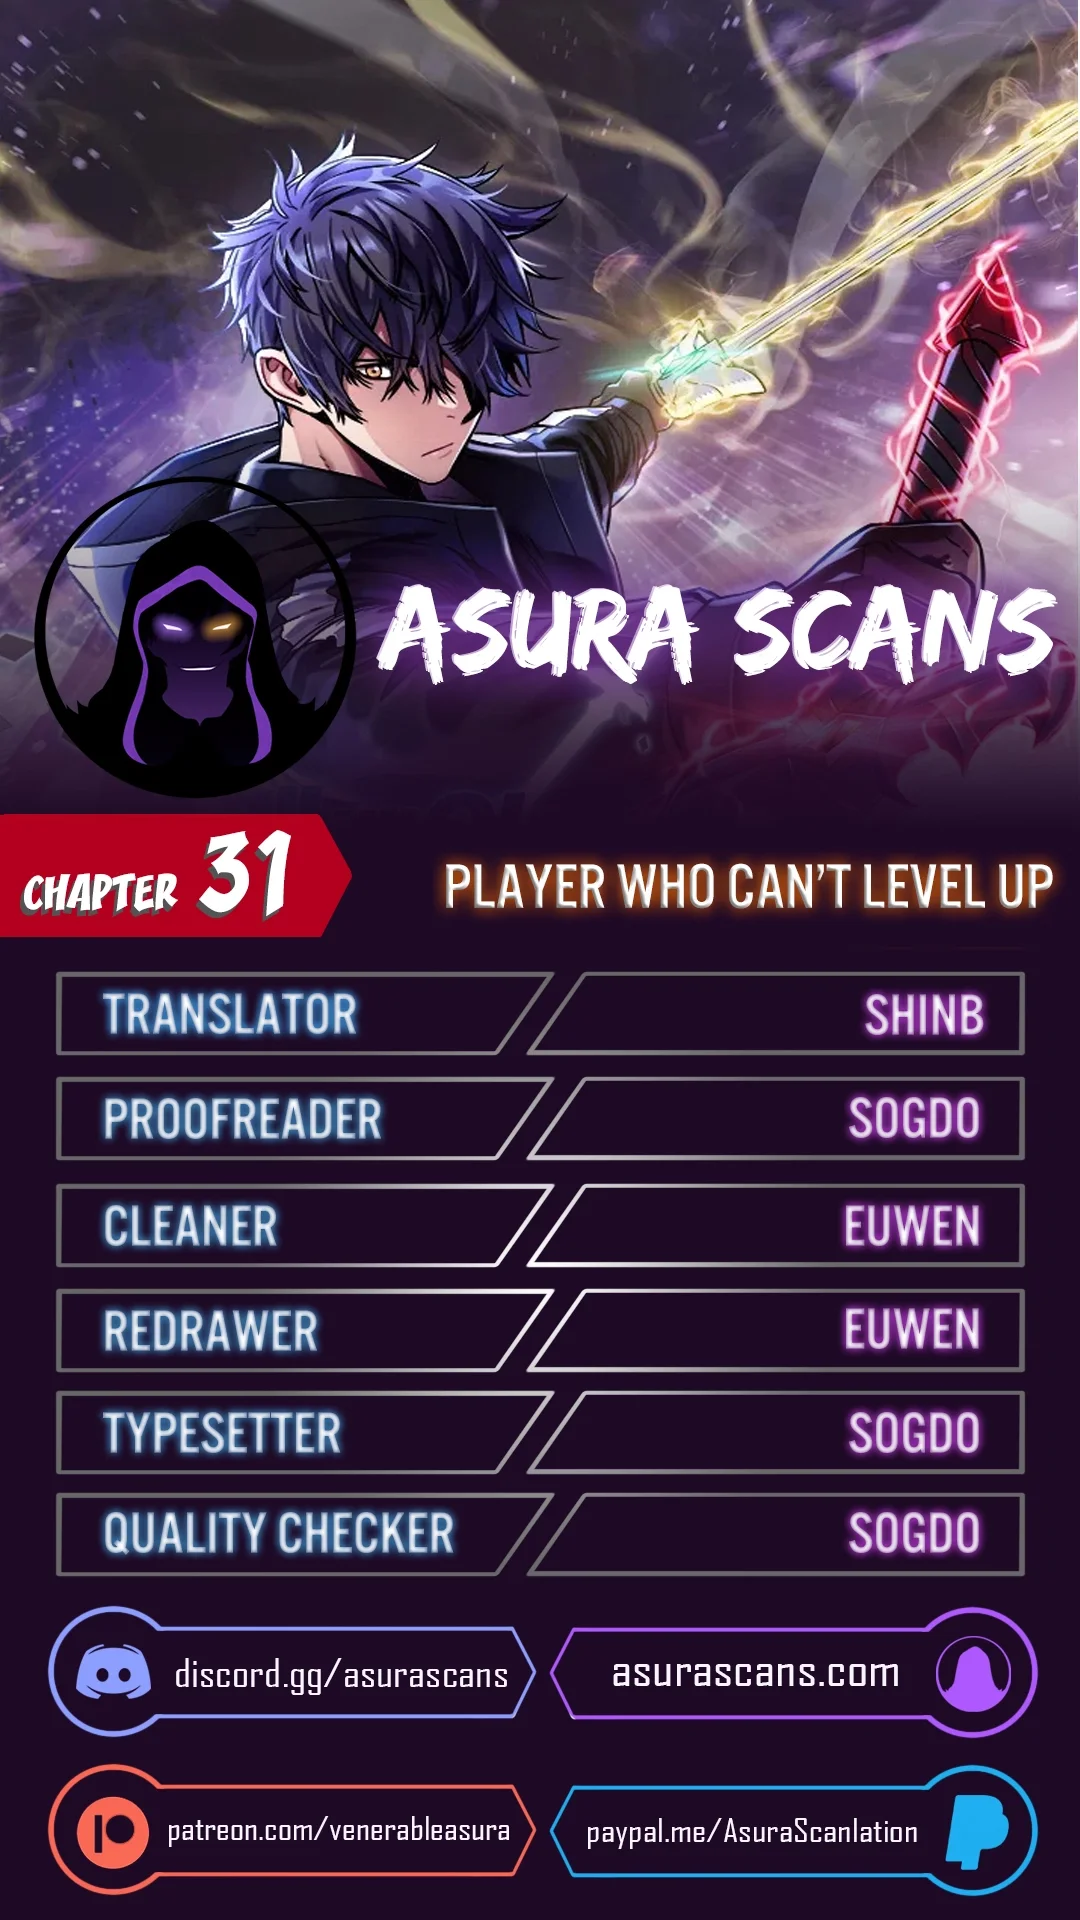 player-who-cant-level-up-chap-31-0